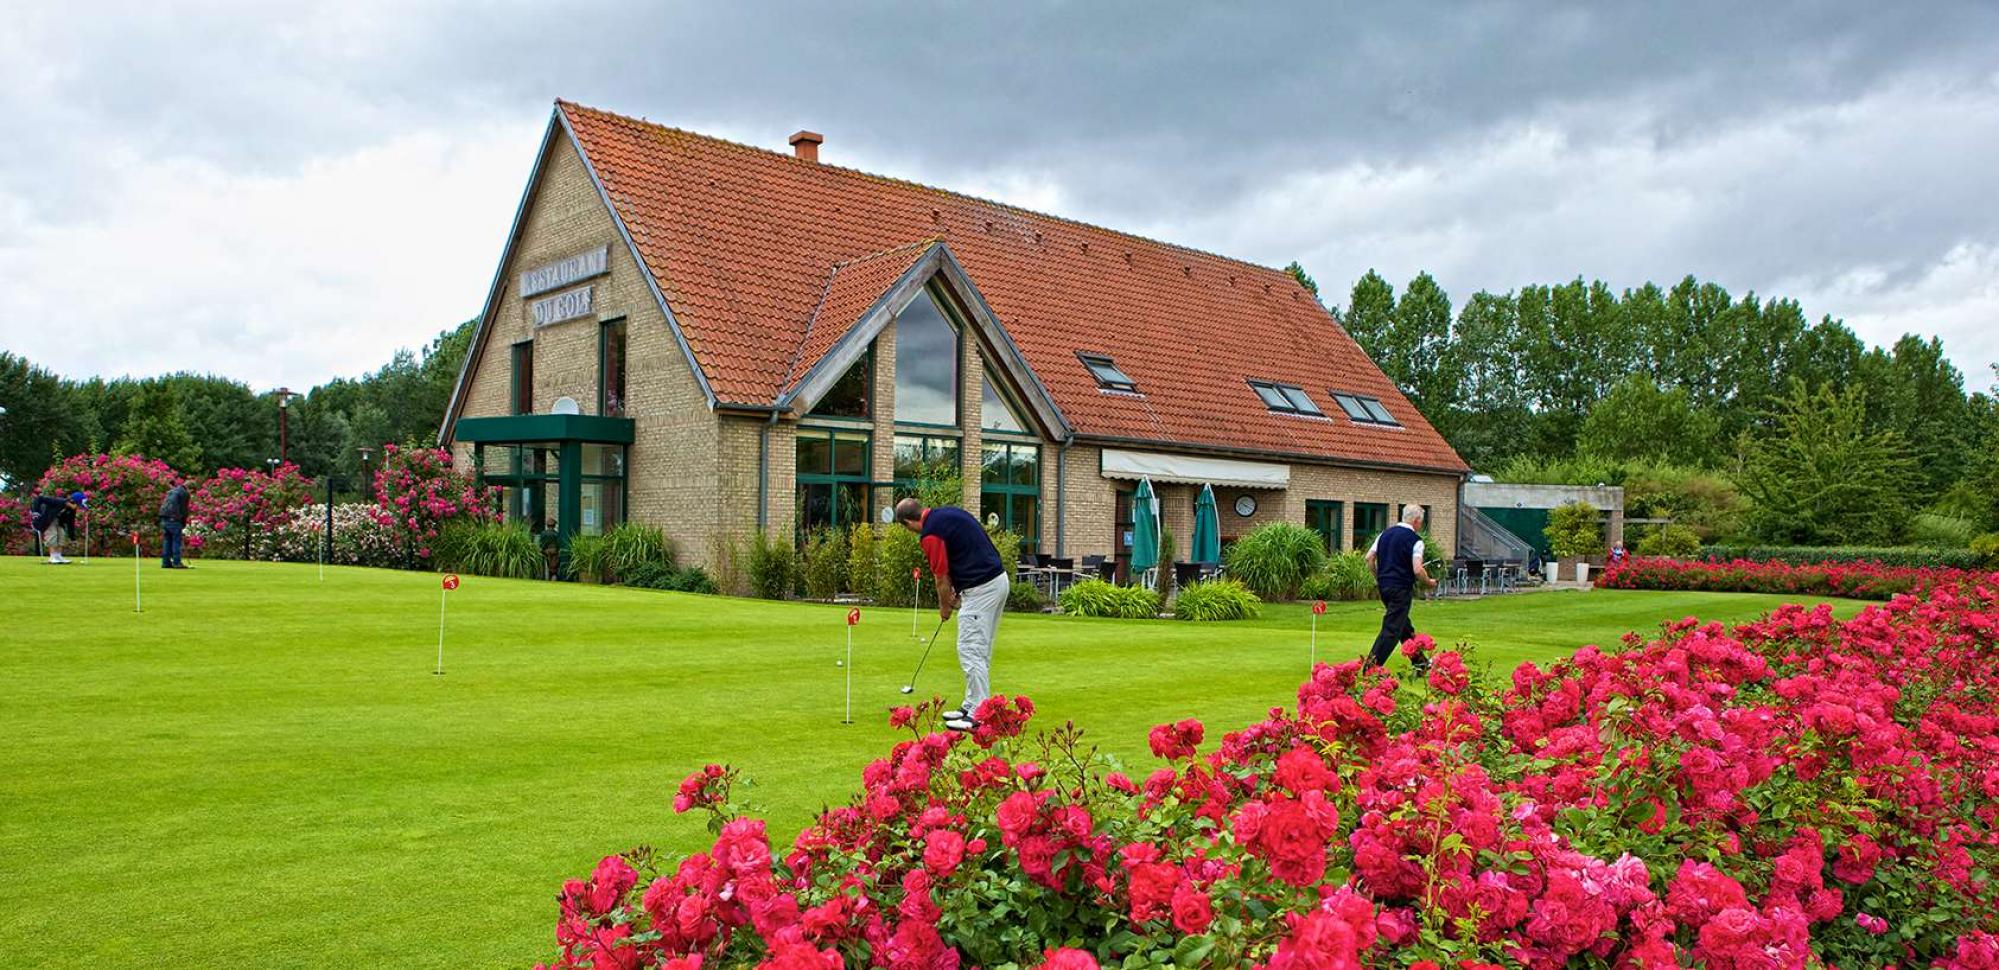 Dunkirk Golf Blue Green has got lots of the most popular golf course near Bruges  Ypres